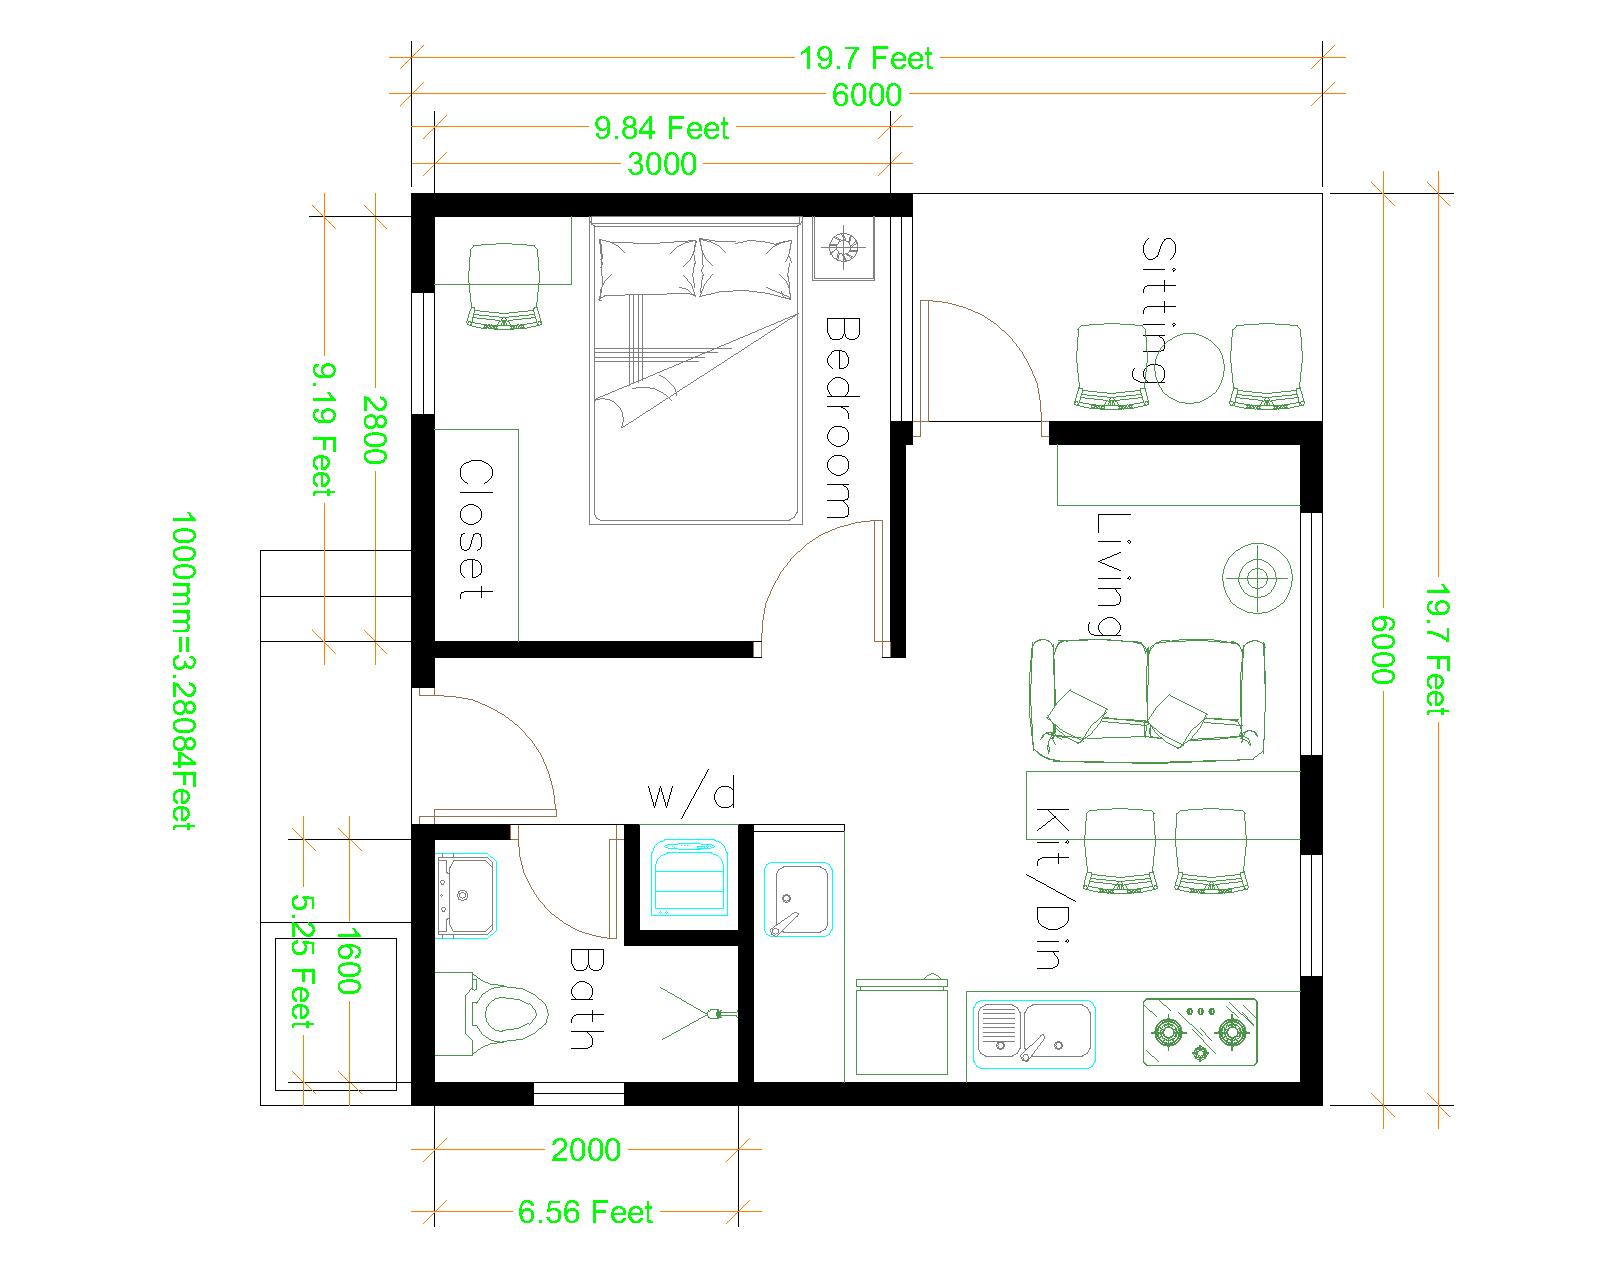 One Bedroom House Plans 6x6 with Shed Roof